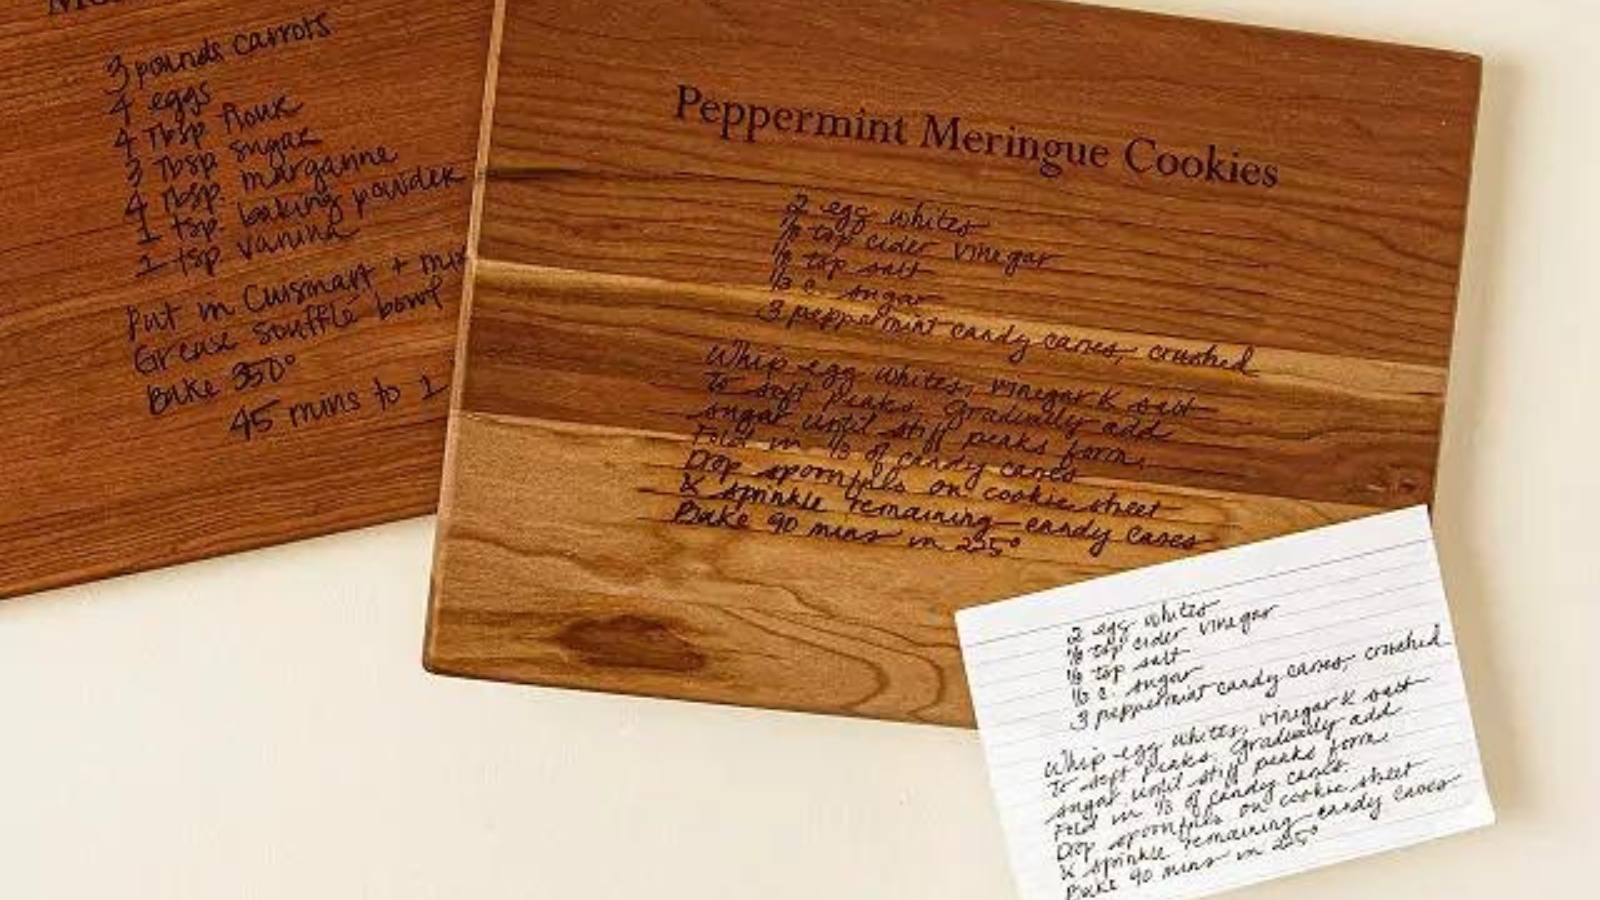 board made of maple or cherry wood that can be engraved with recipes